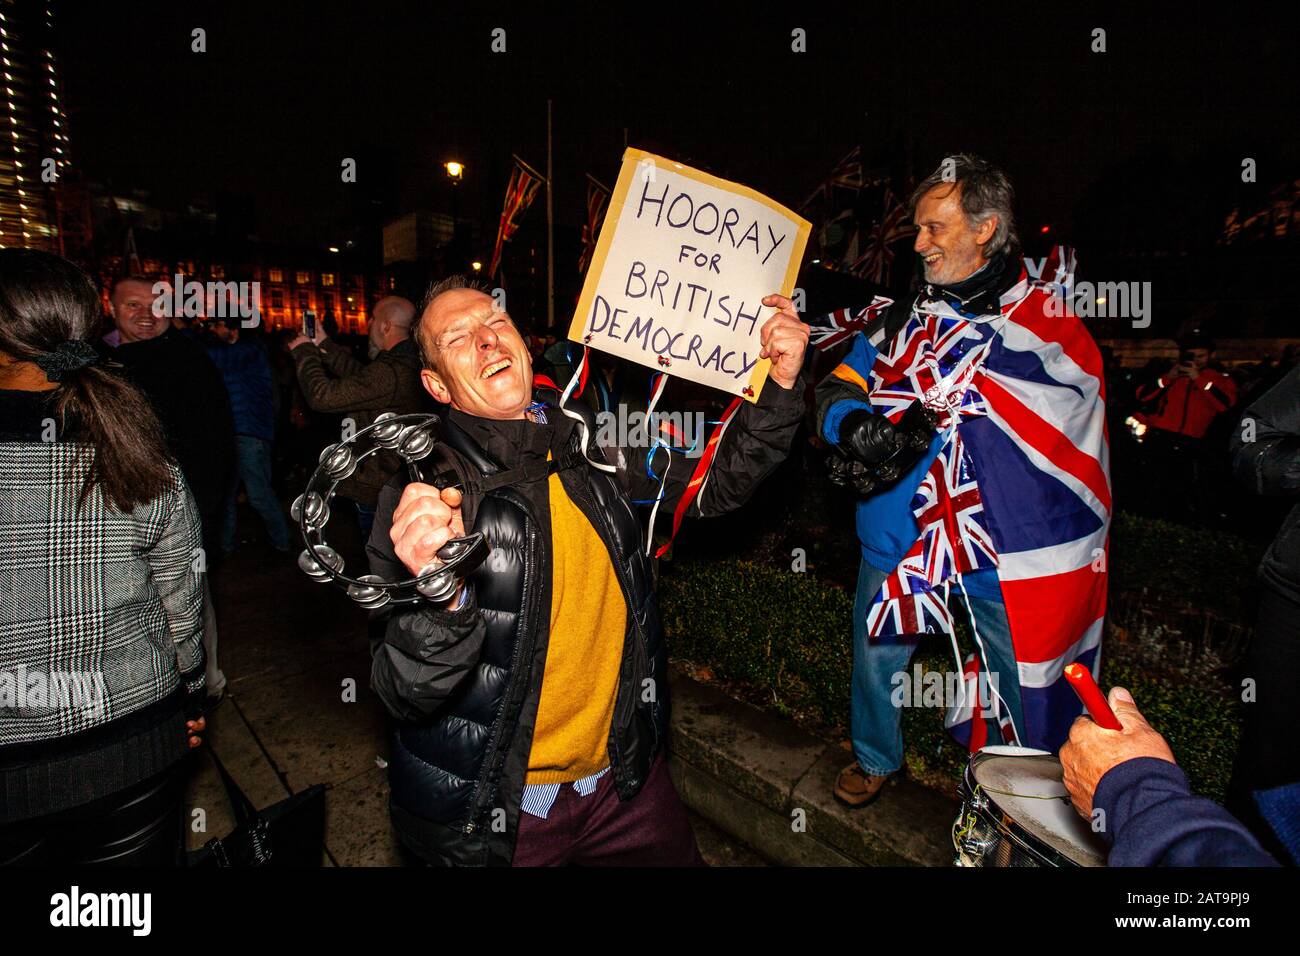 London, UK. 31st Jan, 2020. Brexit supporters celebrate Great Britain leaving the European Union at 11pm in Parliament Square, London. The event has been organised by the cross party group ‘leave means leave'. Credit: Grant Rooney/Alamy Live News Stock Photo